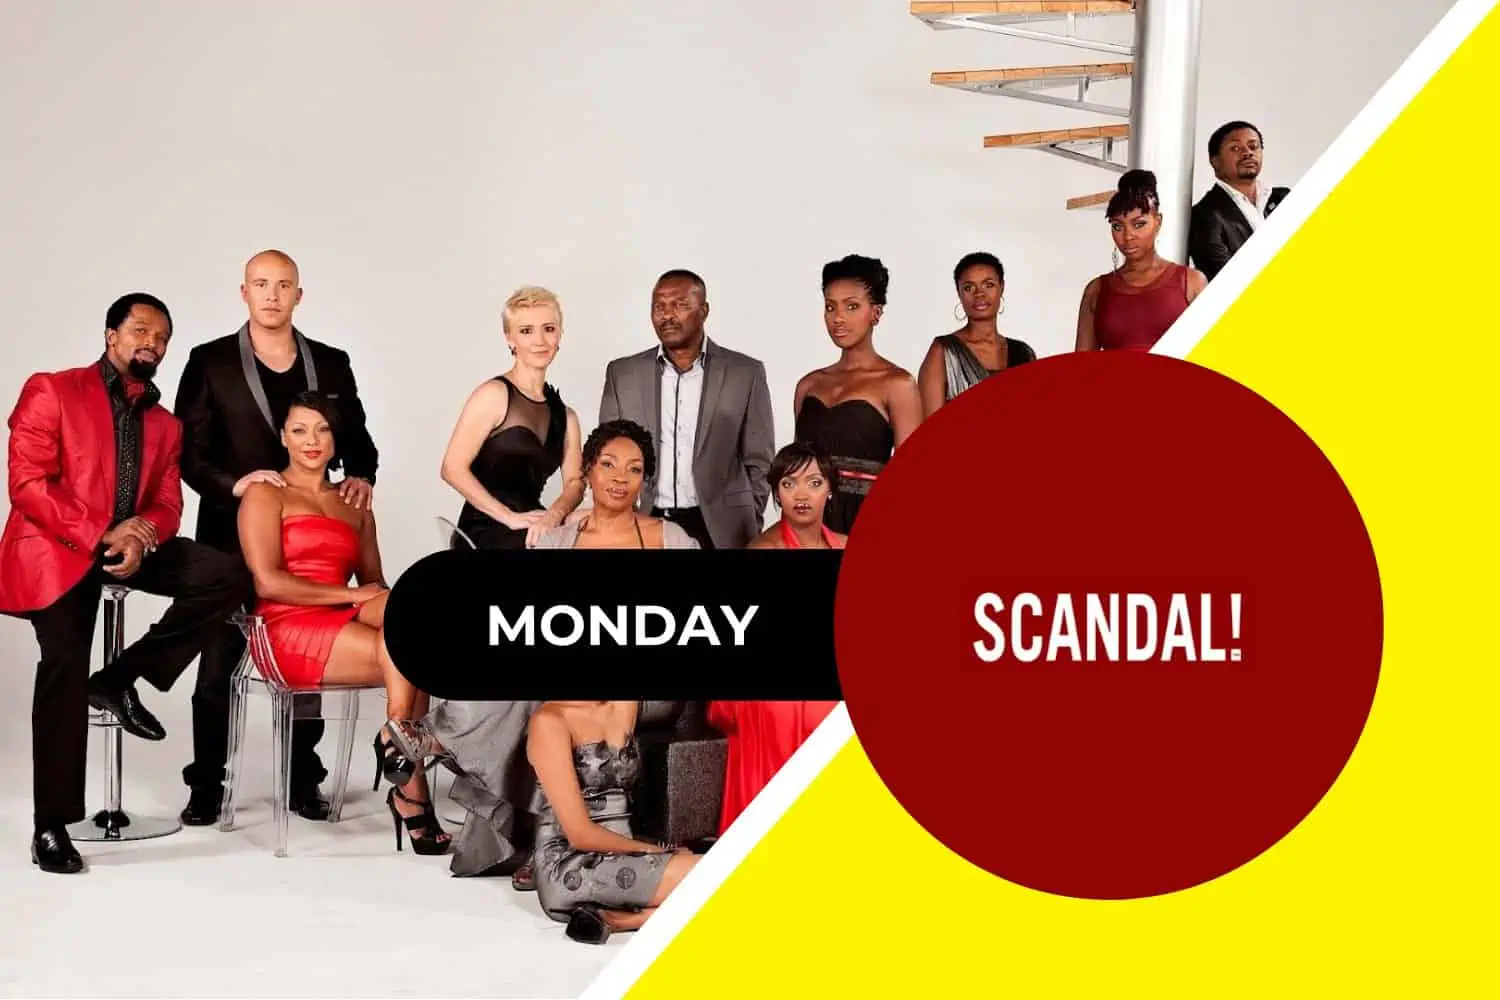 On today's episode of Scandal! Monday